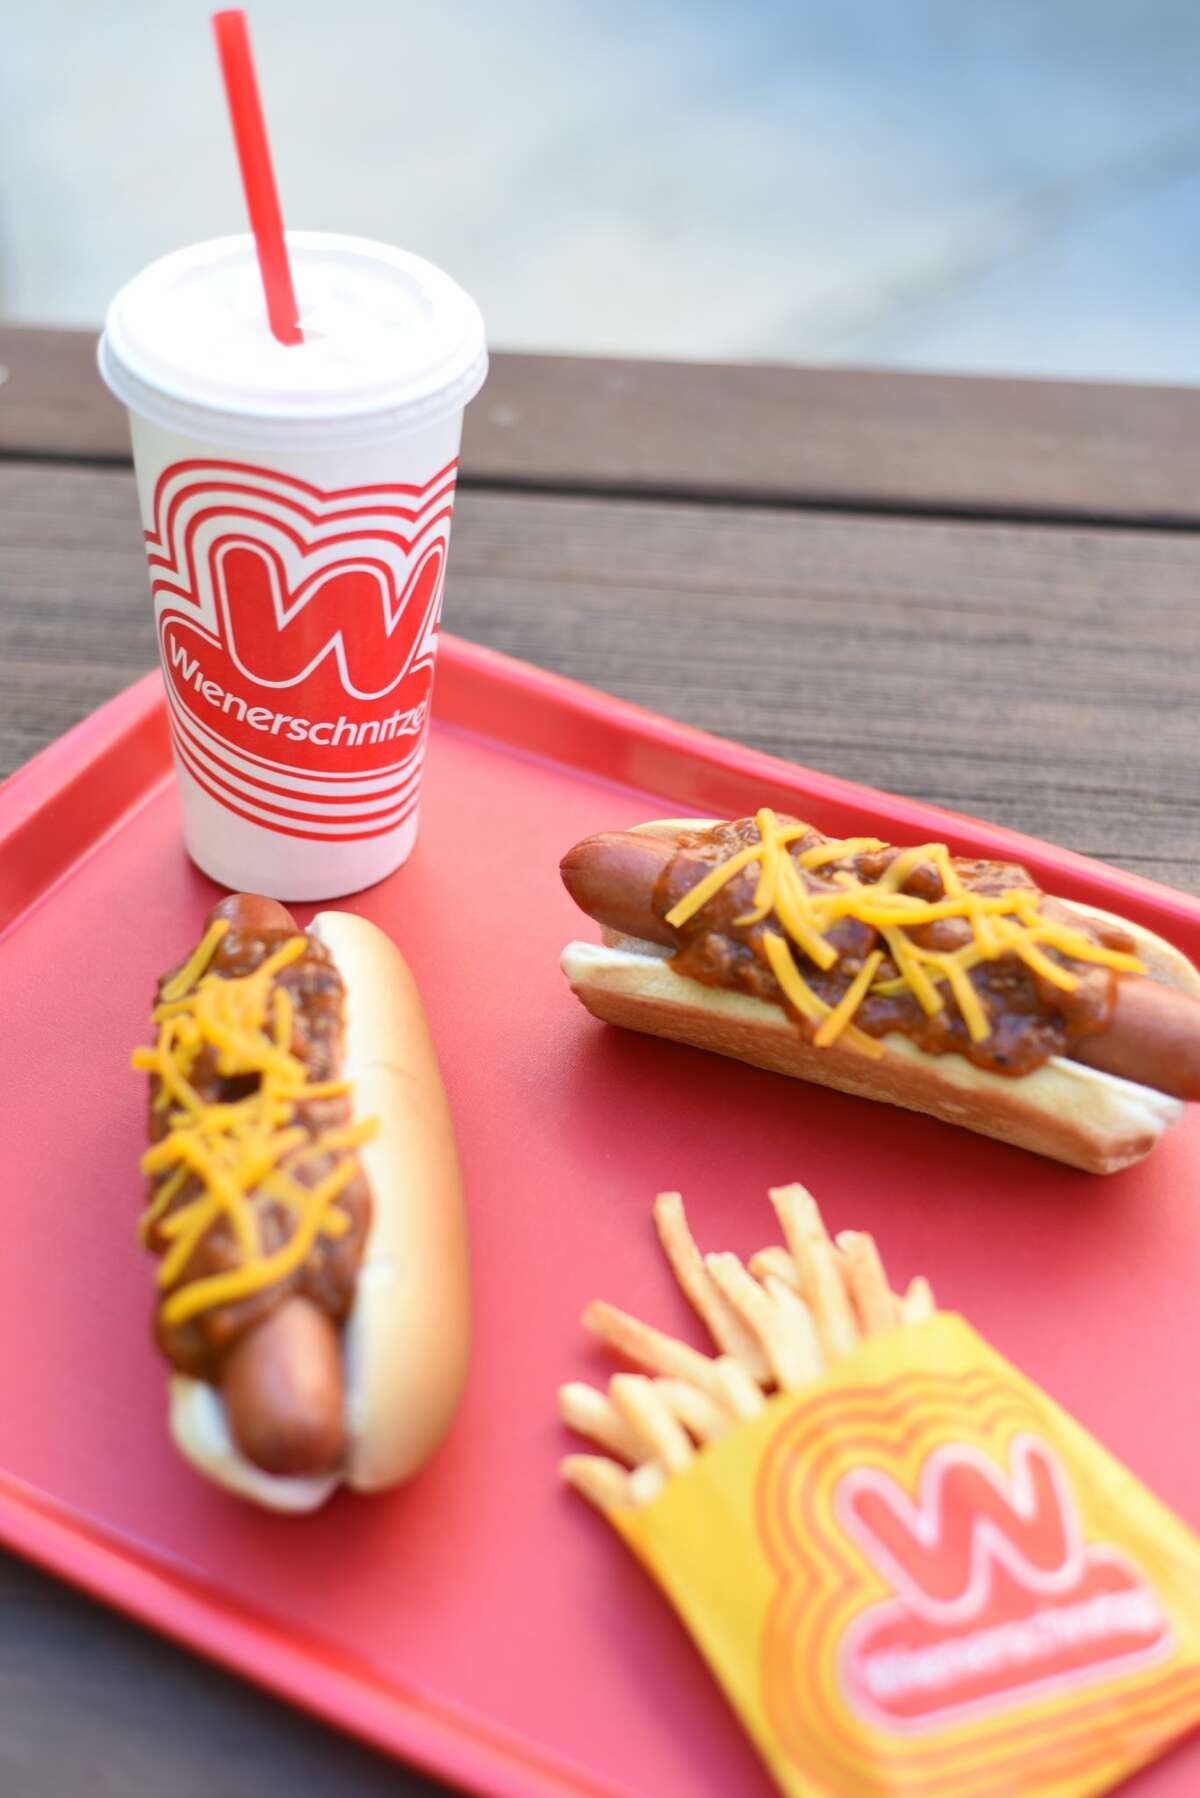 The New Caney location will offer the chain's iconic hot dog-focused menu as well as burgers, sandwiches and breakfast items.